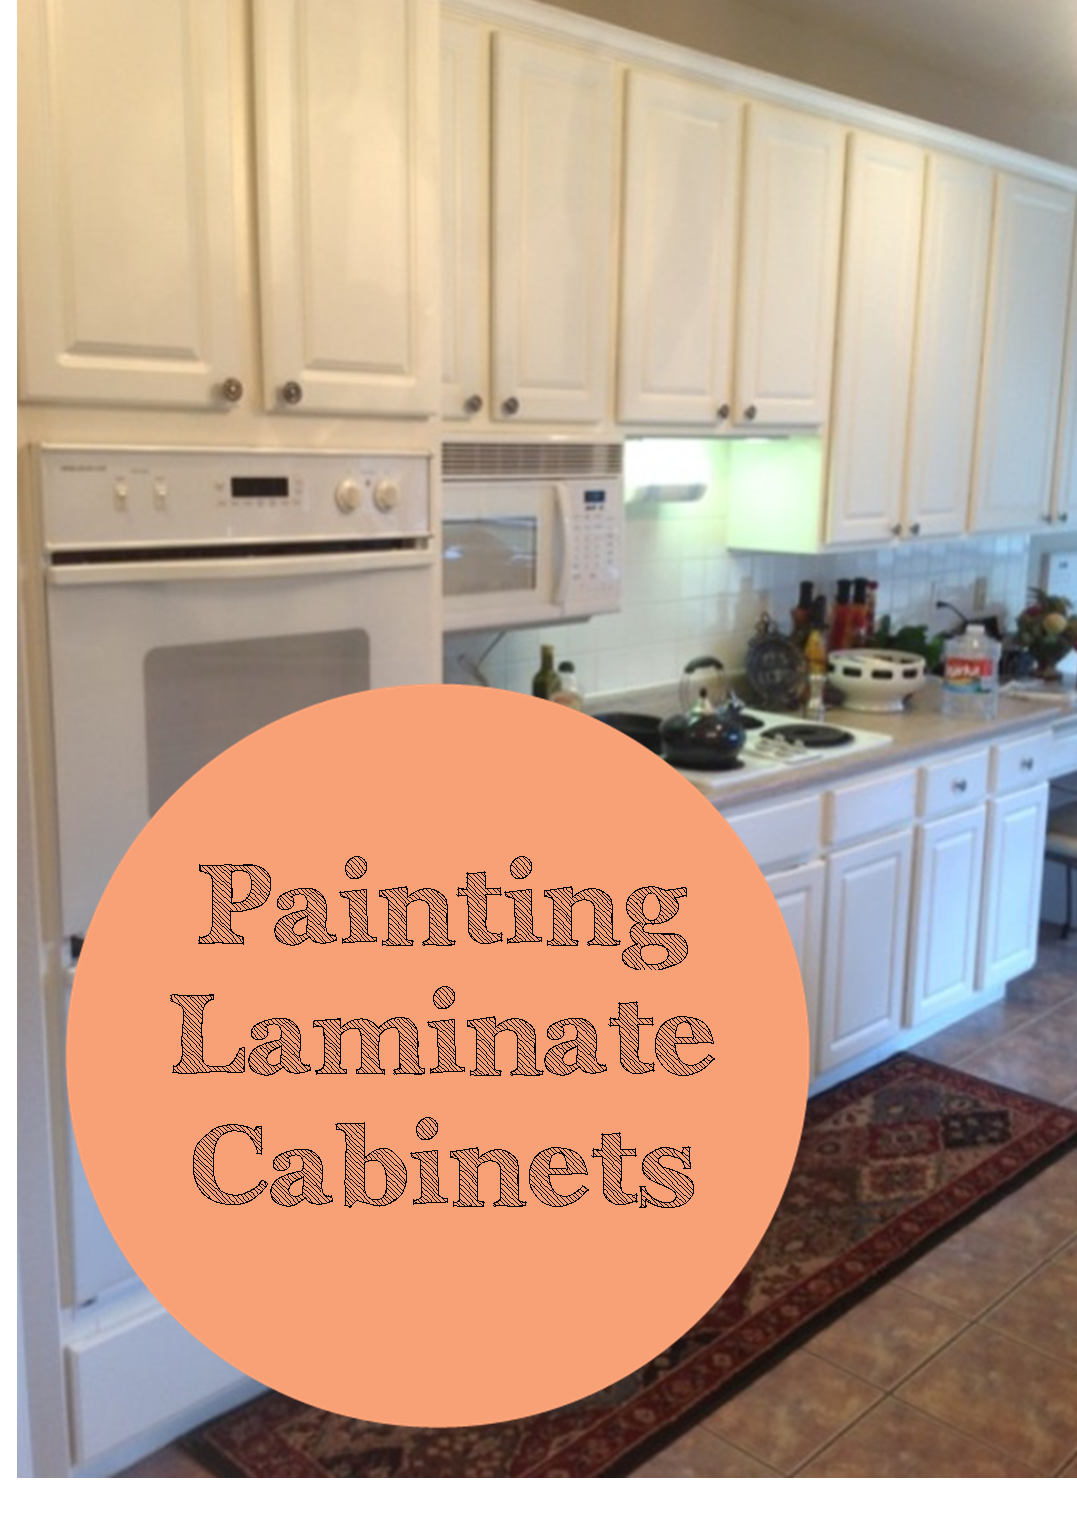 The ragged wren Painting Laminated Cabinets 